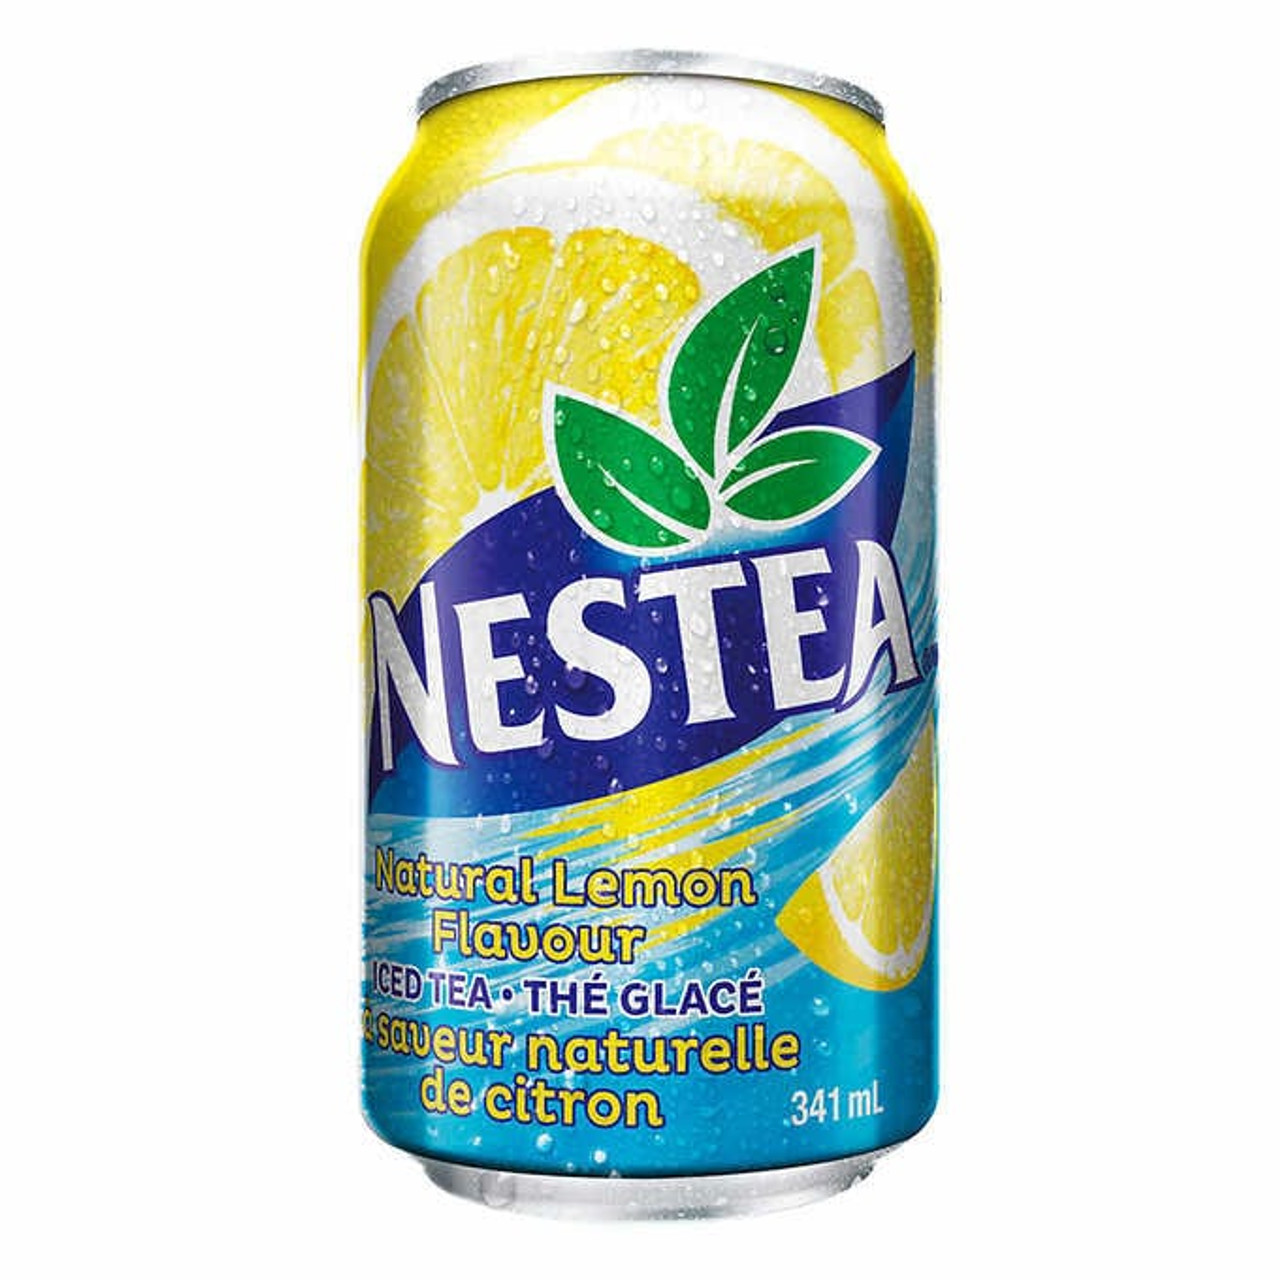 Nestea Iced Tea, 24 x 341 mL - Refreshing and Flavorful Bottled Iced Tea Pack- Chicken Pieces